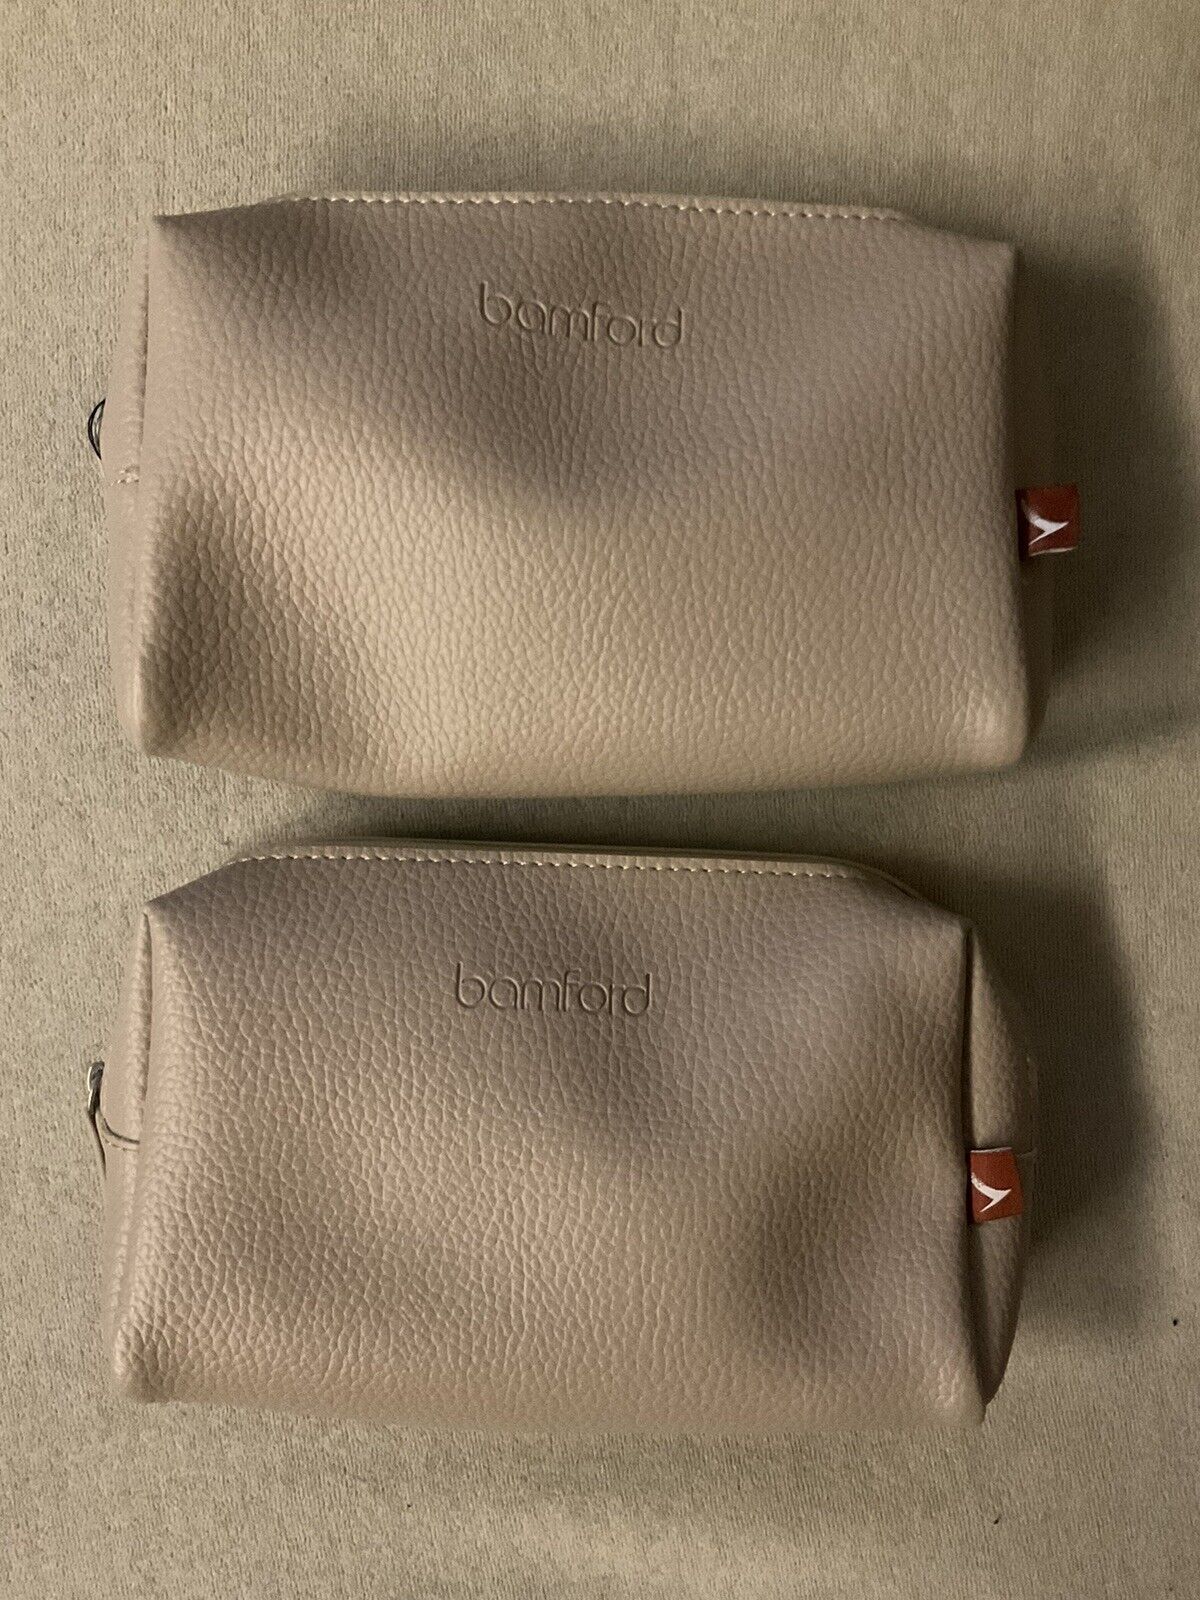 New Cathay Pacific Business Class Empty Pouch Bamford (Vegan leather) Set Of 2